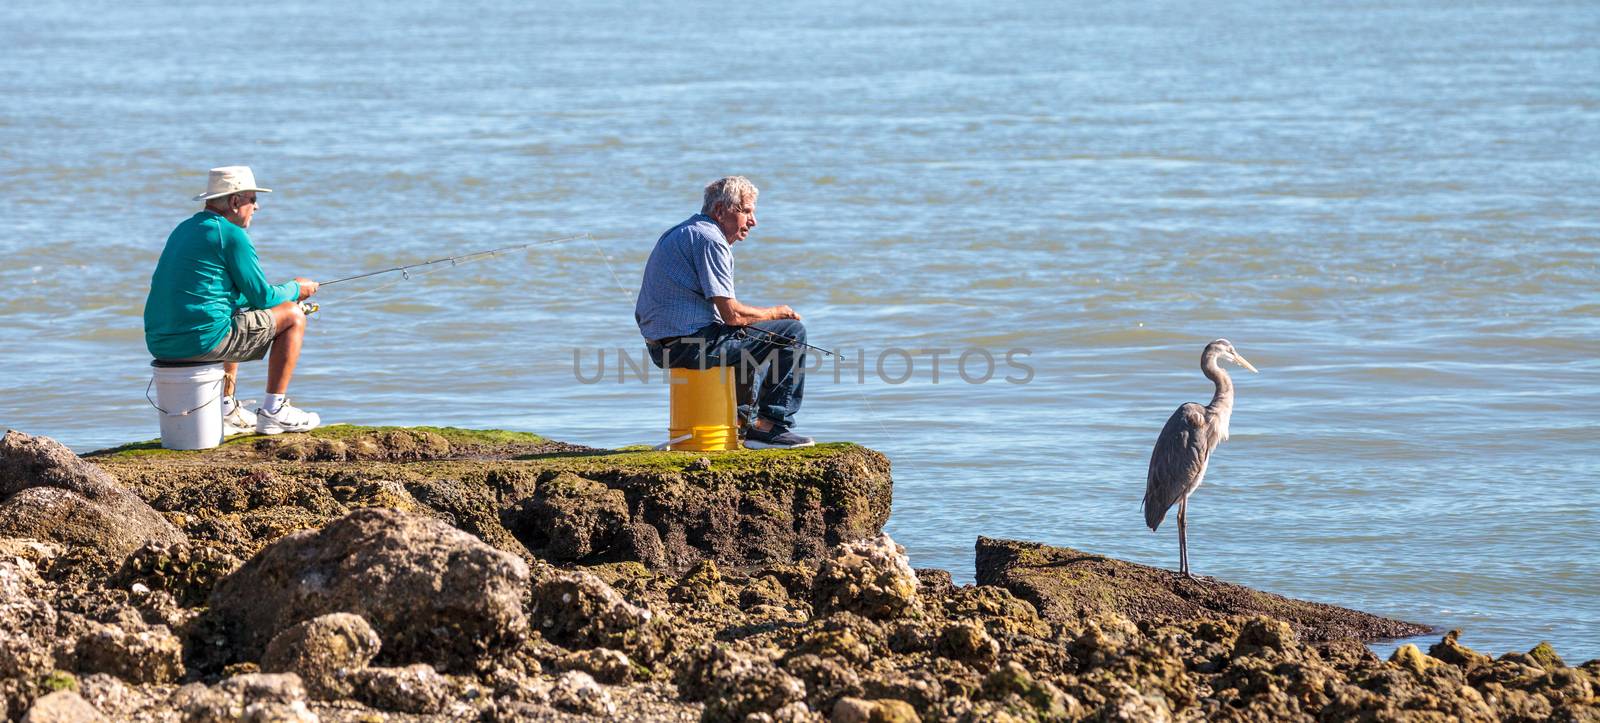 Marco Island, Florida, USA – February 17, 2018: Three fishing, two men and a great blue heron Ardea herodias perch by the ocean and fish. Editorial use.